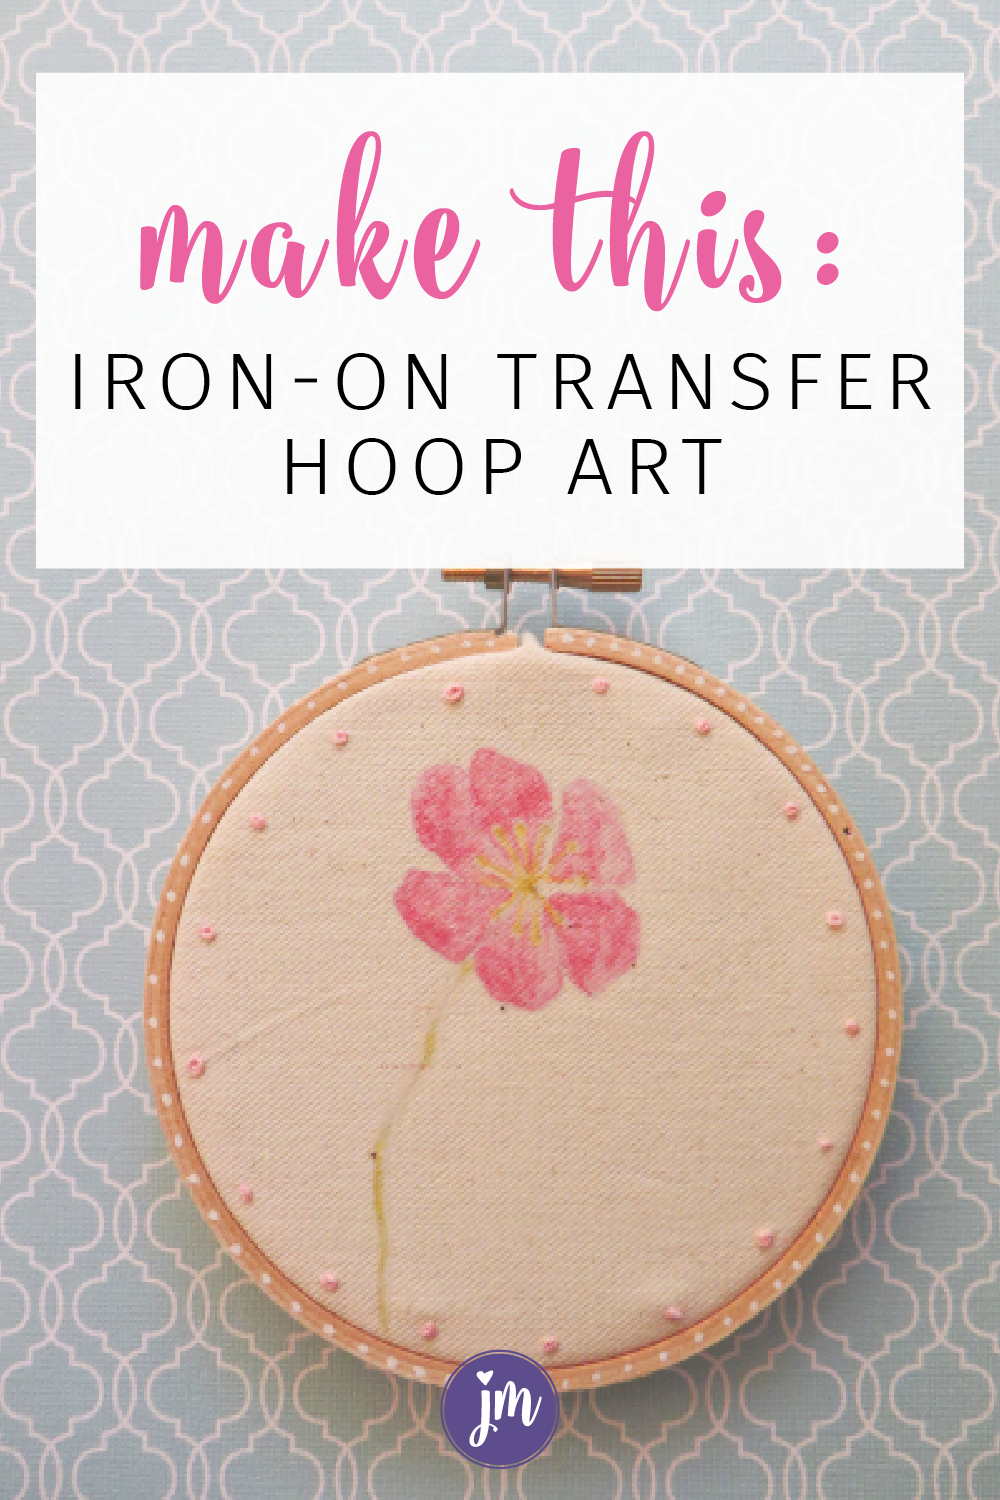 What a great idea! I never thought to use iron-on transfers to make pretty hoop art. All I have to do is print the image I want, iron it on the fabric and then add some quick embroidered details if I want. Sooooo easy! I love simple craft projects and think I'll make some of these for gifts this year.